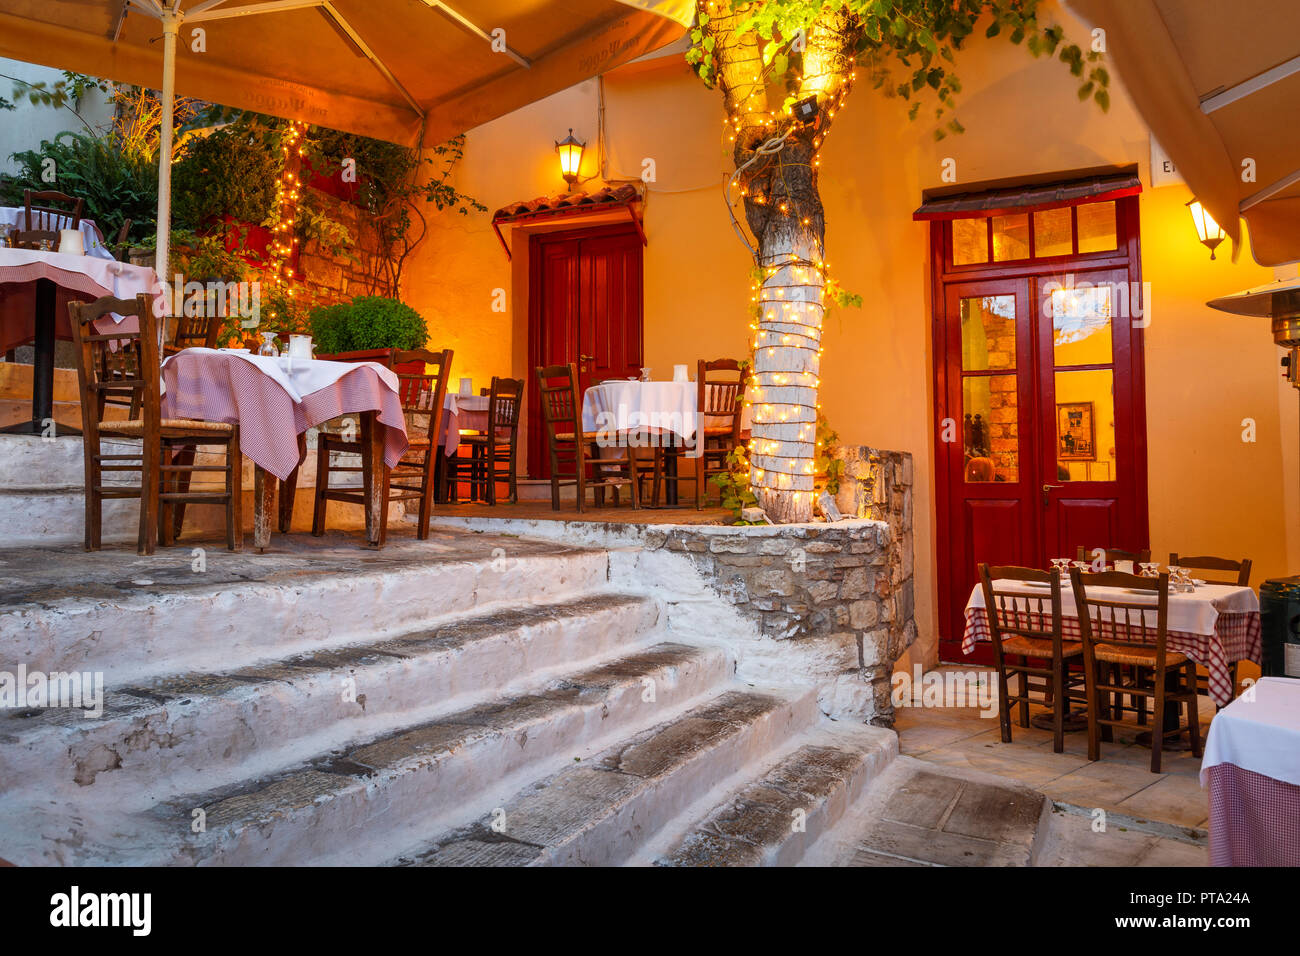 Athens, Greece - September 25, 2018: Taverna in a street of Plaka district in Athens, Greece. Stock Photo